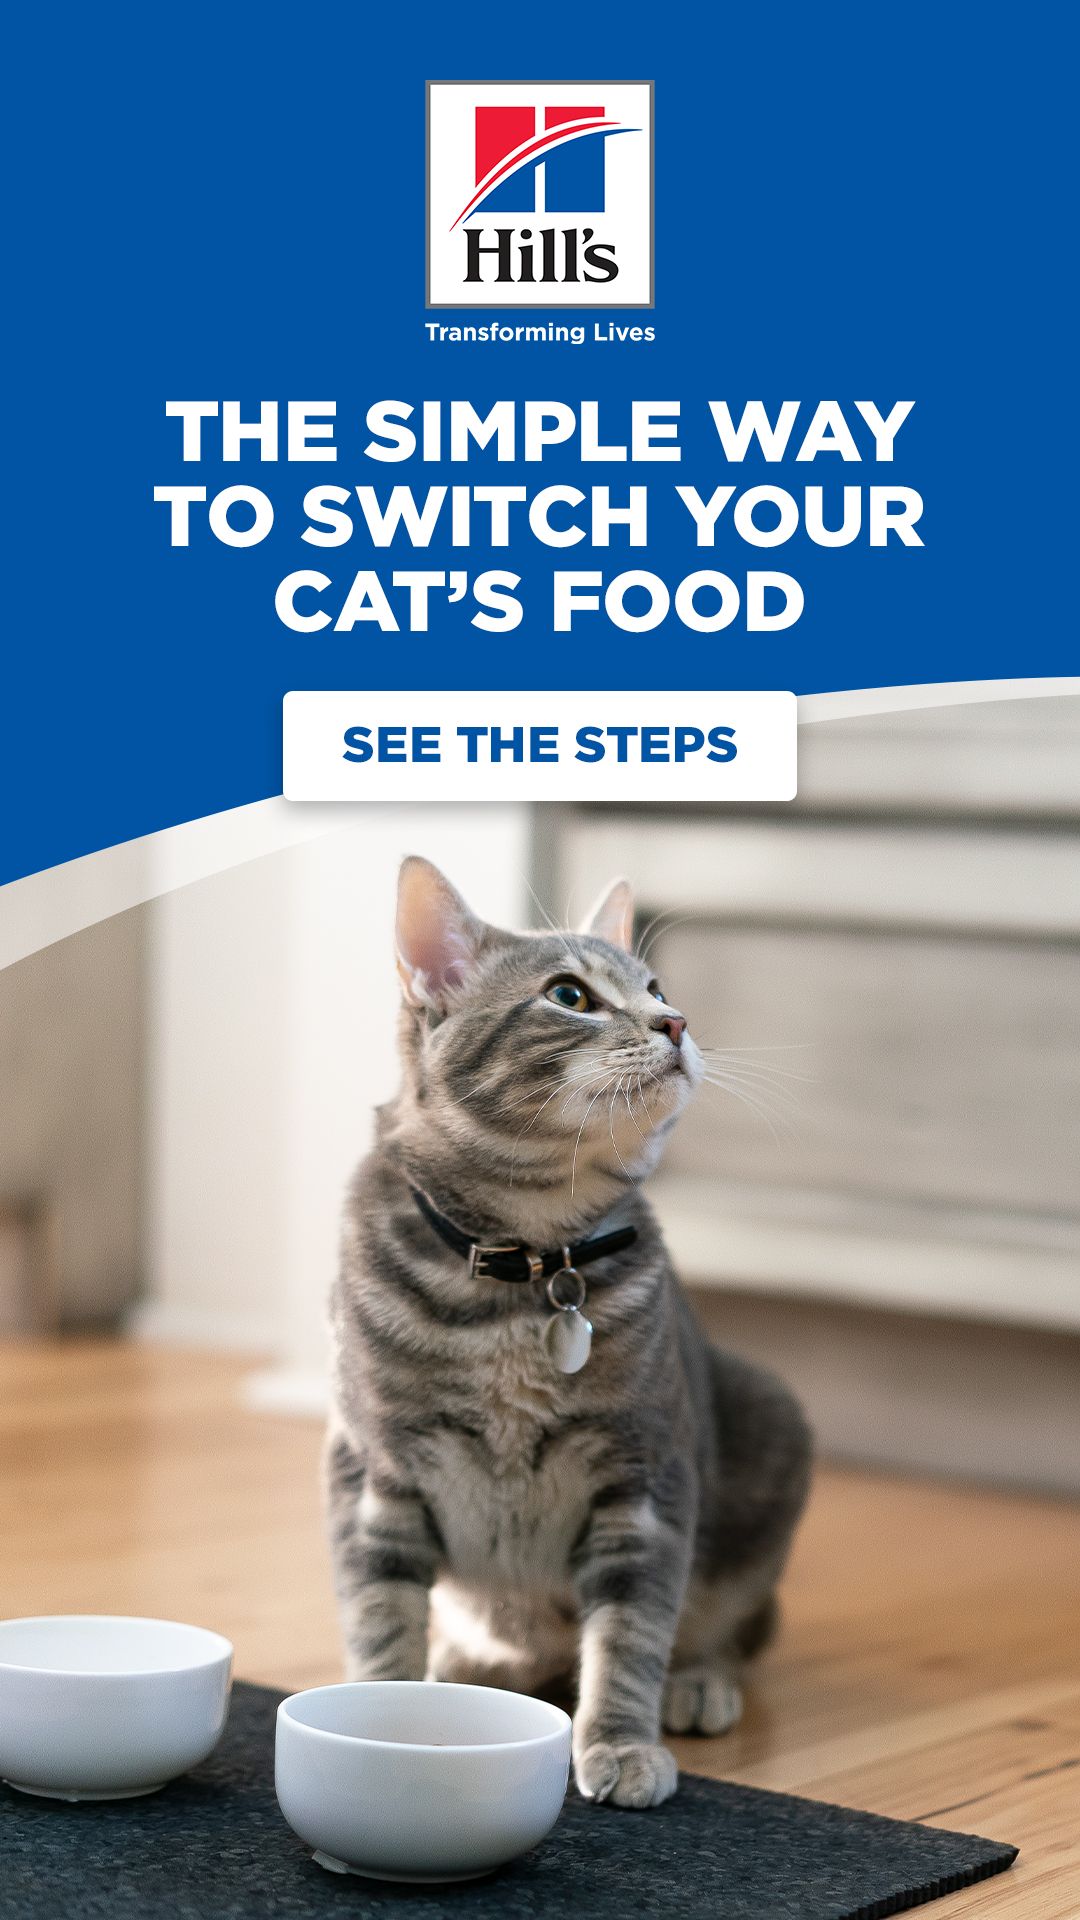 How Do I Switch or Transition Cat Foods?